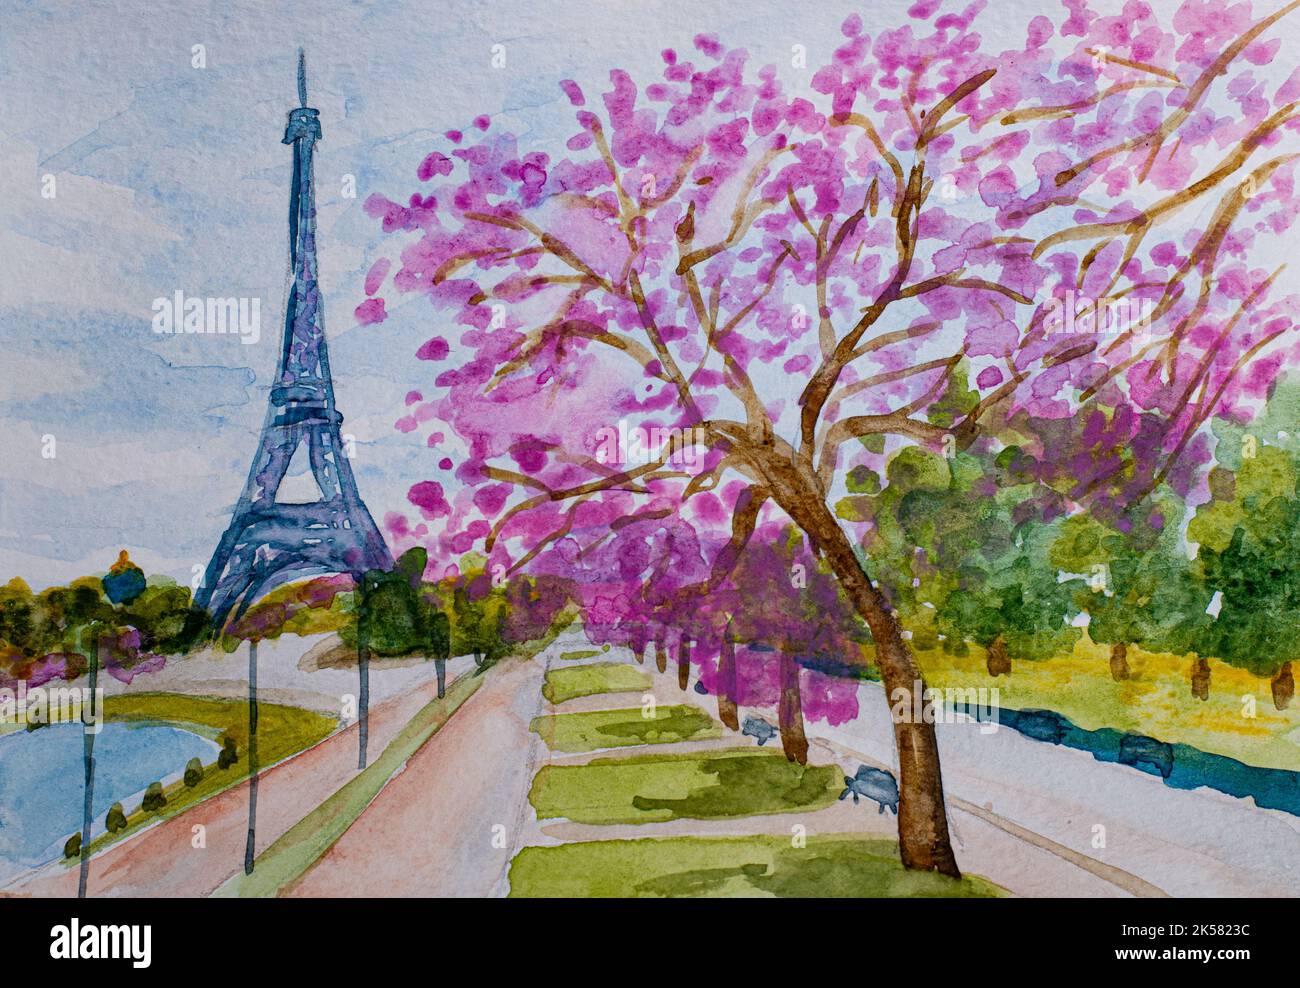 Paris cityscape, Eiffel Tower with spring cherry blossom in France. Watercolor painting Stock Photo